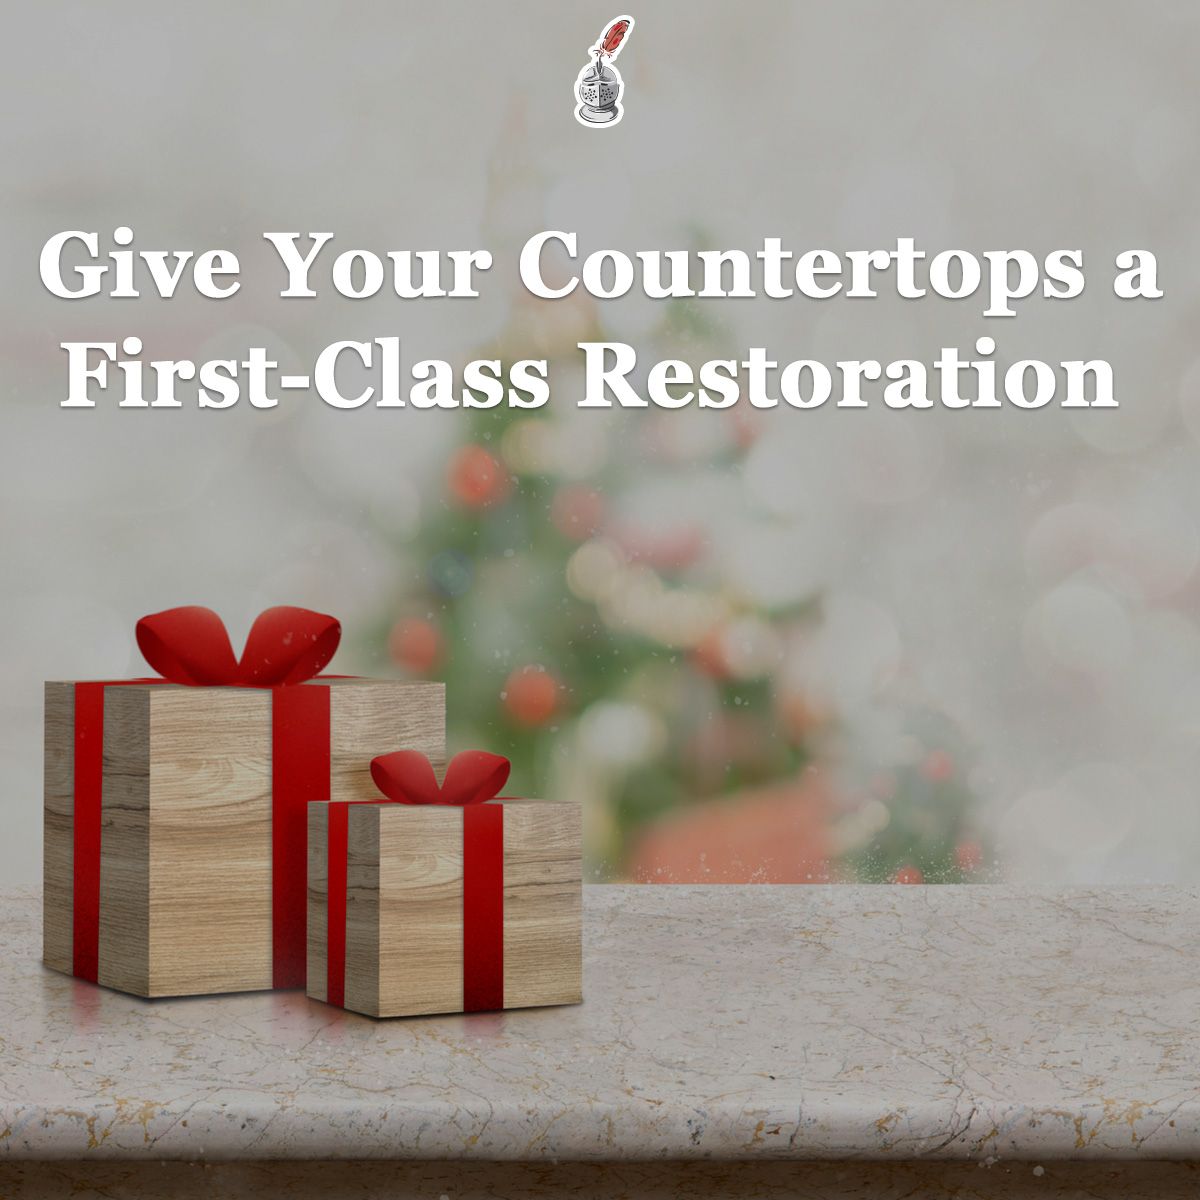 Give Your Countertops a First-Class Restoration